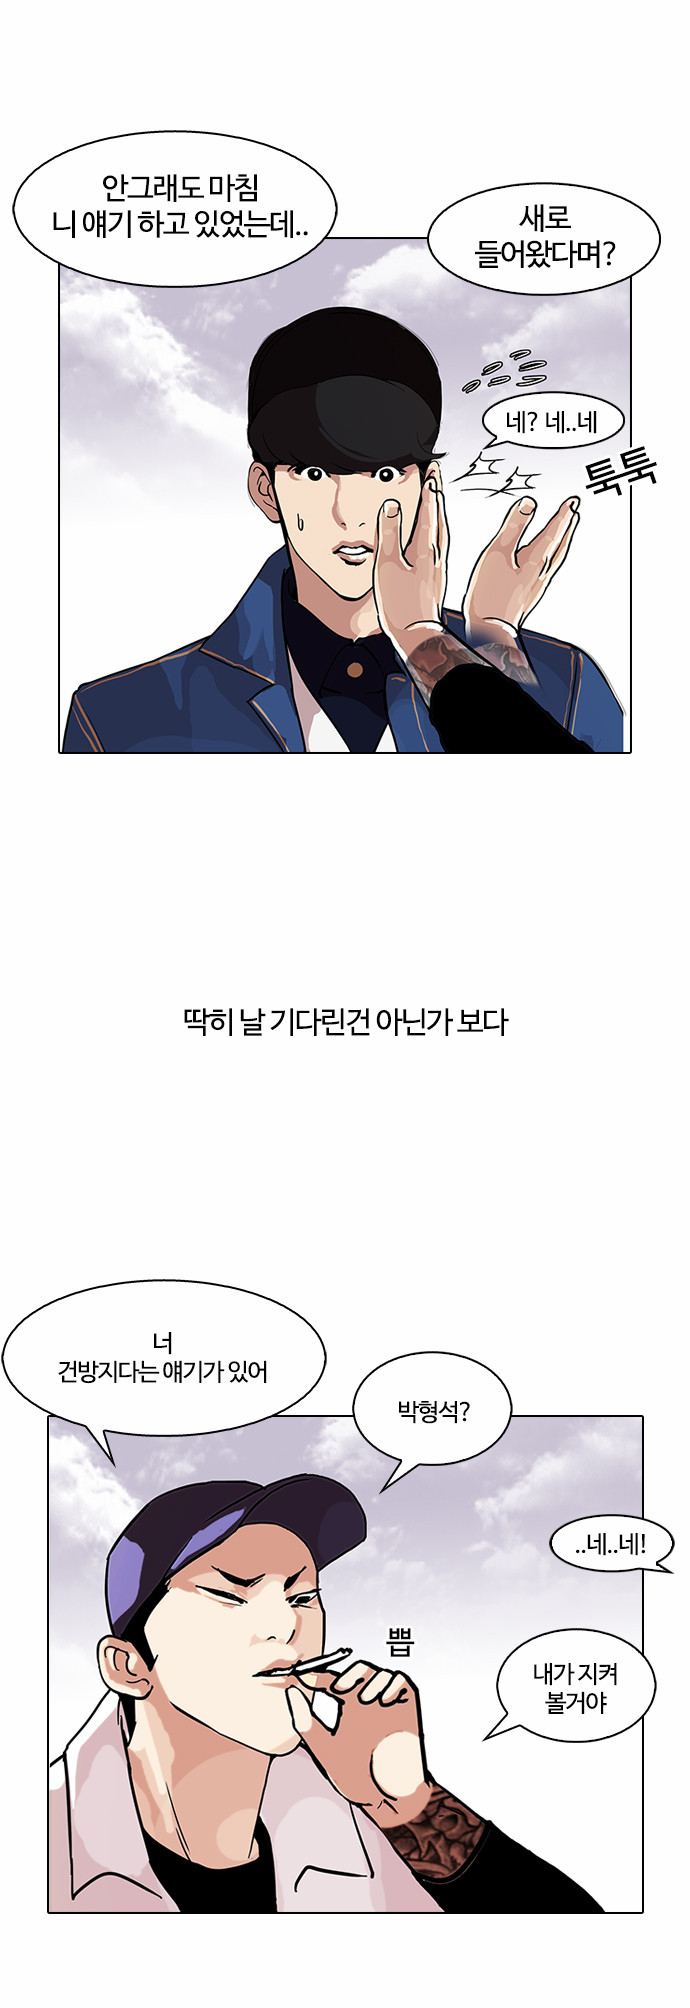 Lookism - Chapter 98 - Page 2